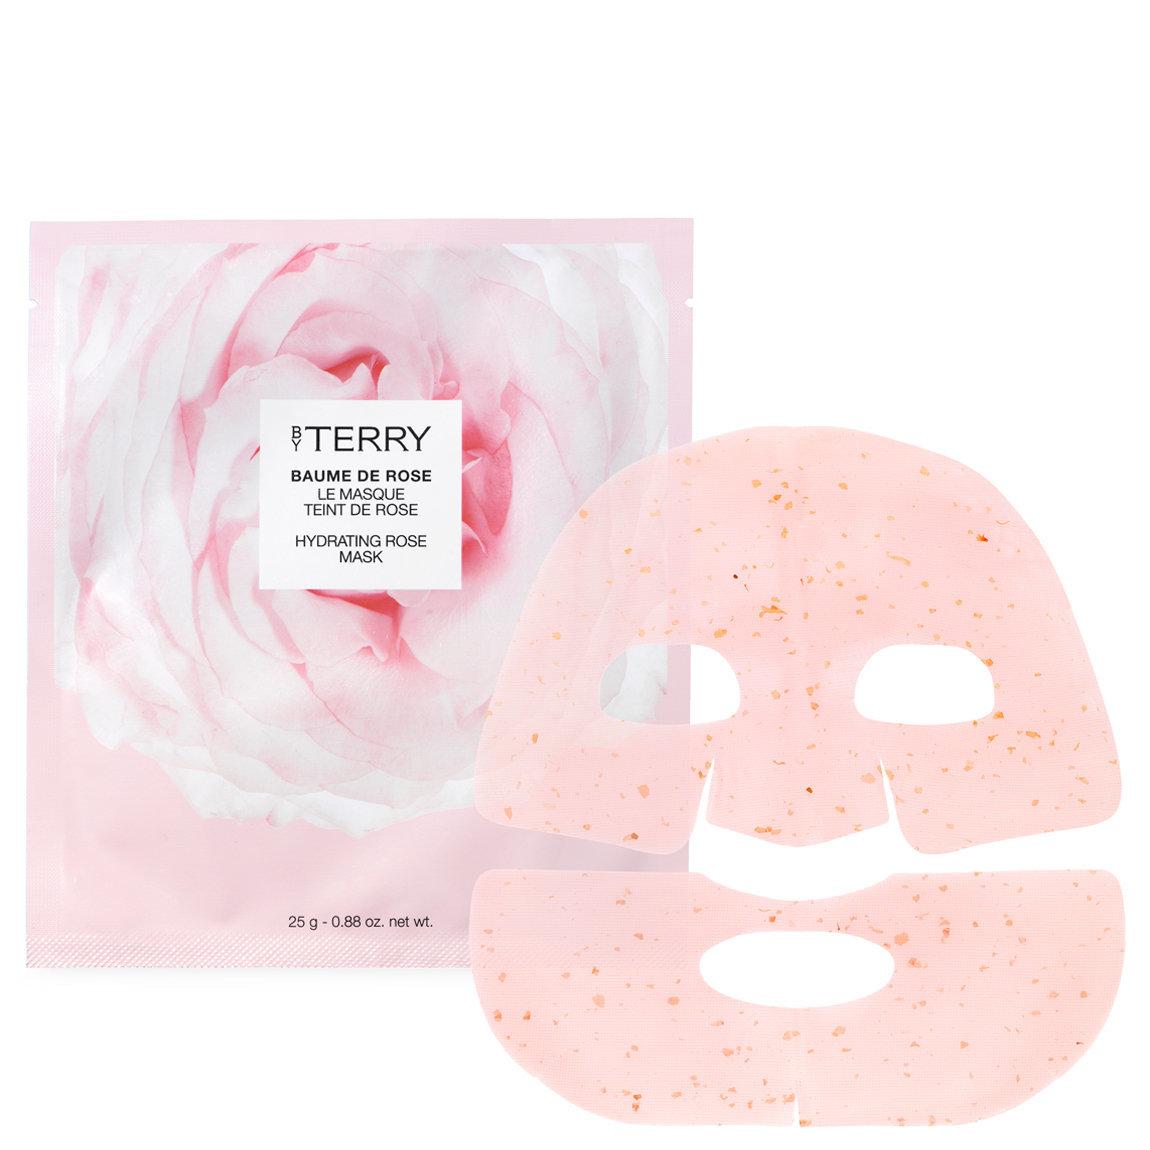 BY TERRY Baume de Rose Hydrating Sheet Mask alternative view 1 - product swatch.